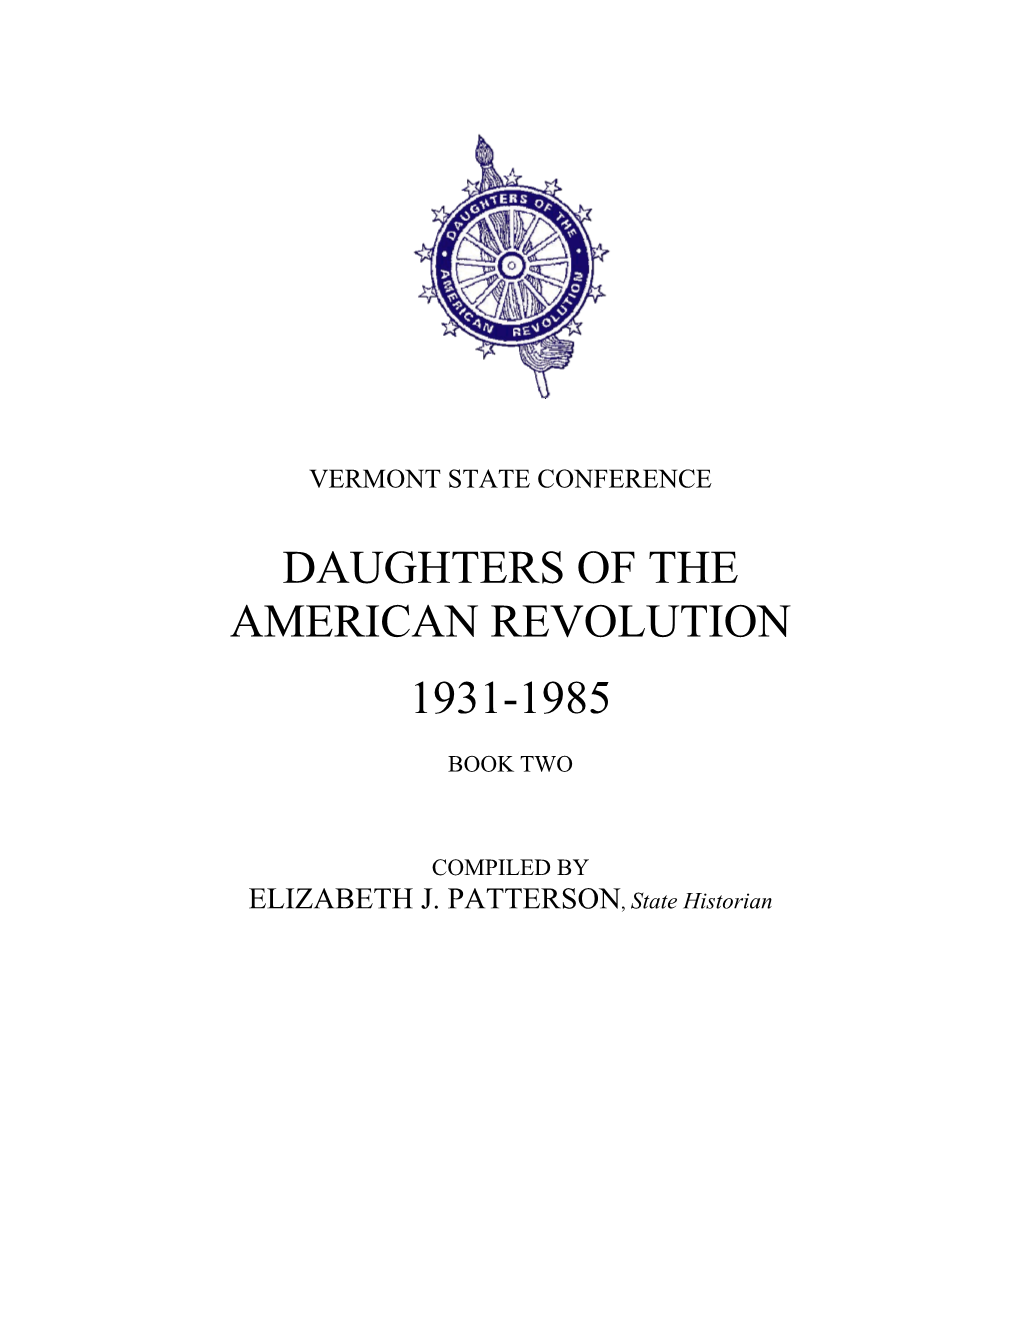 Daughters of the American Revolution 1931-1985